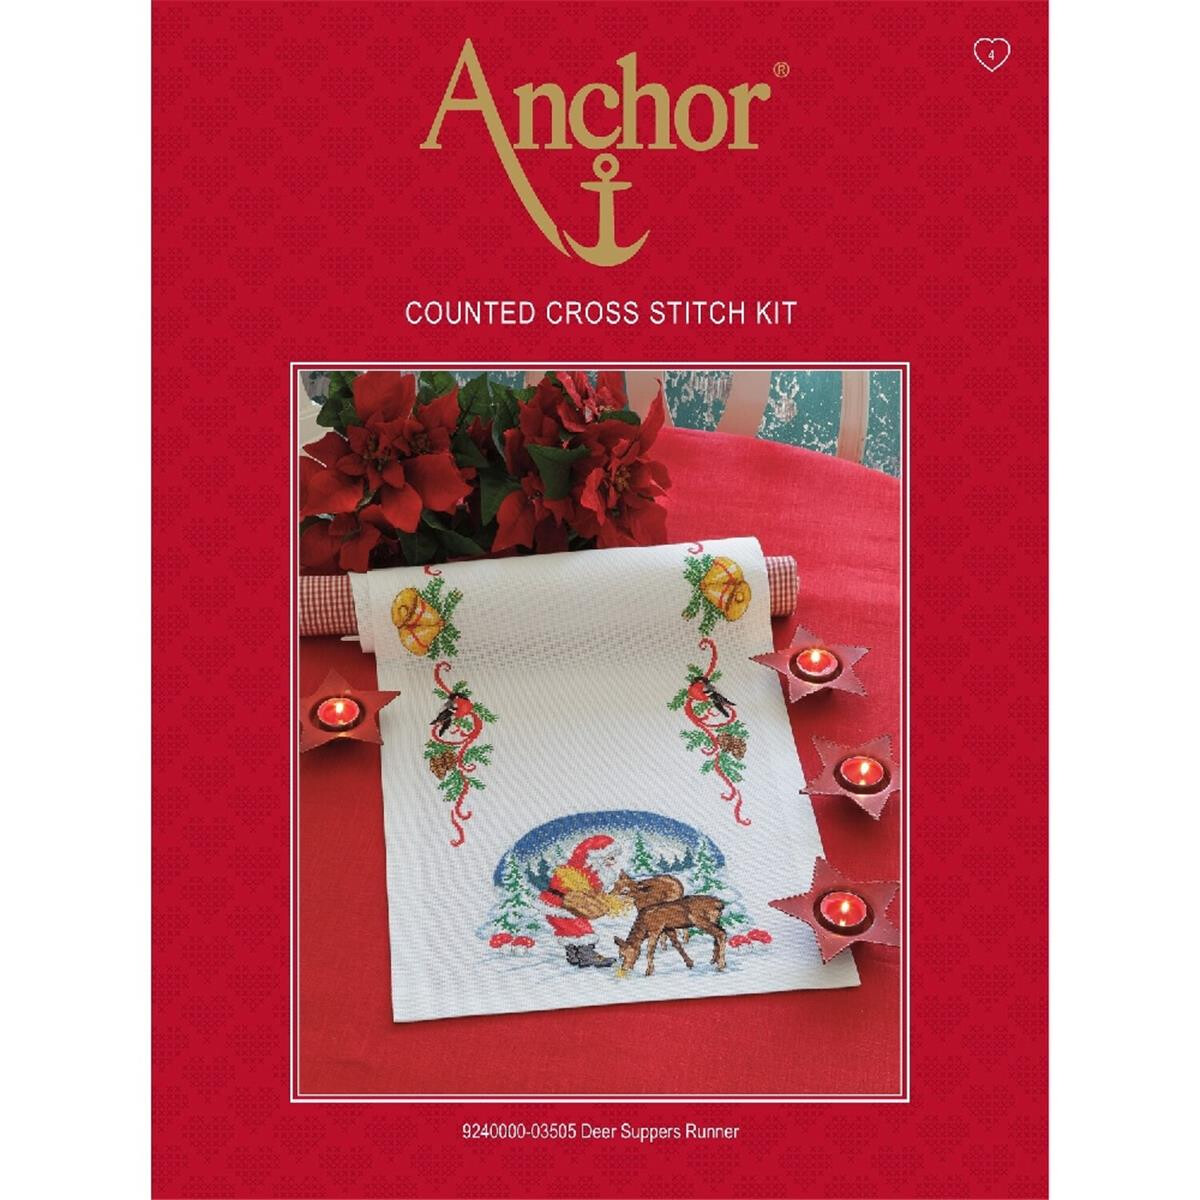 Anchor counted Cross Stitch kit Table runner "Deer...